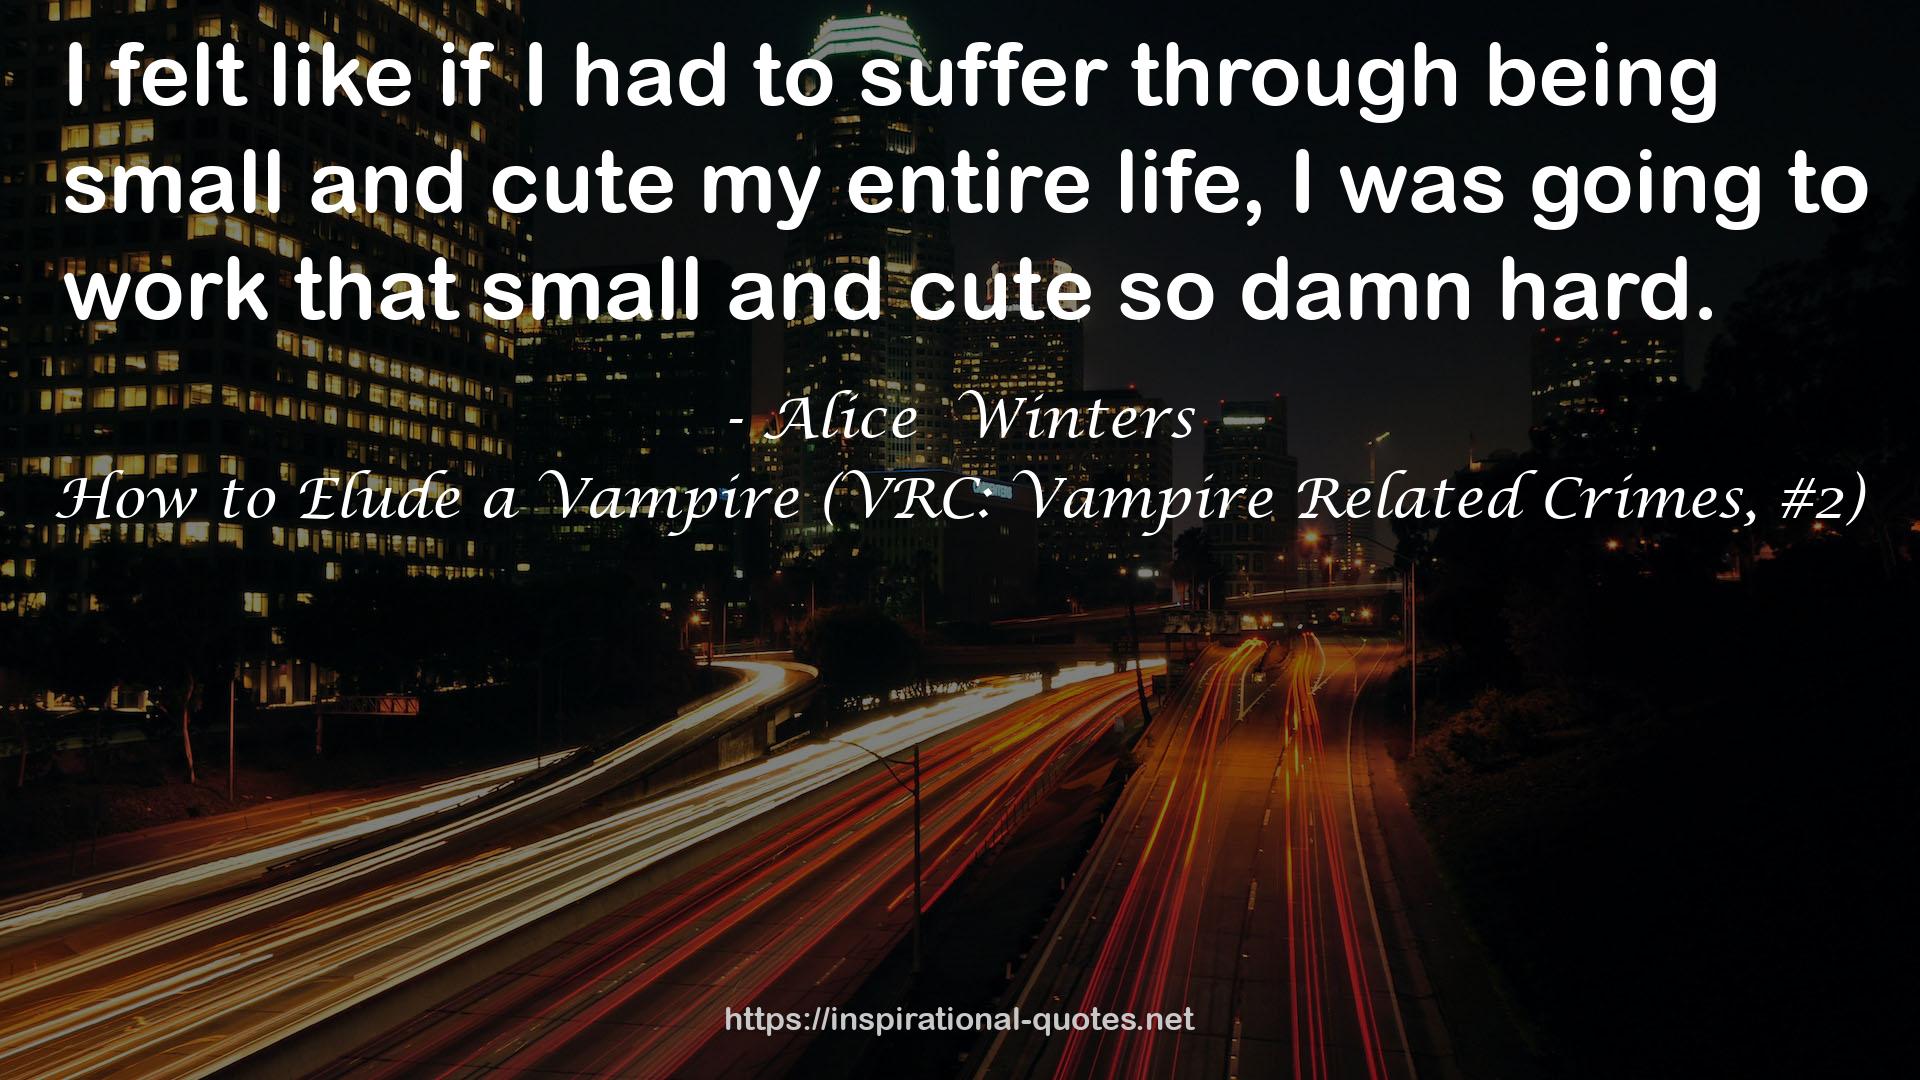 How to Elude a Vampire (VRC: Vampire Related Crimes, #2) QUOTES